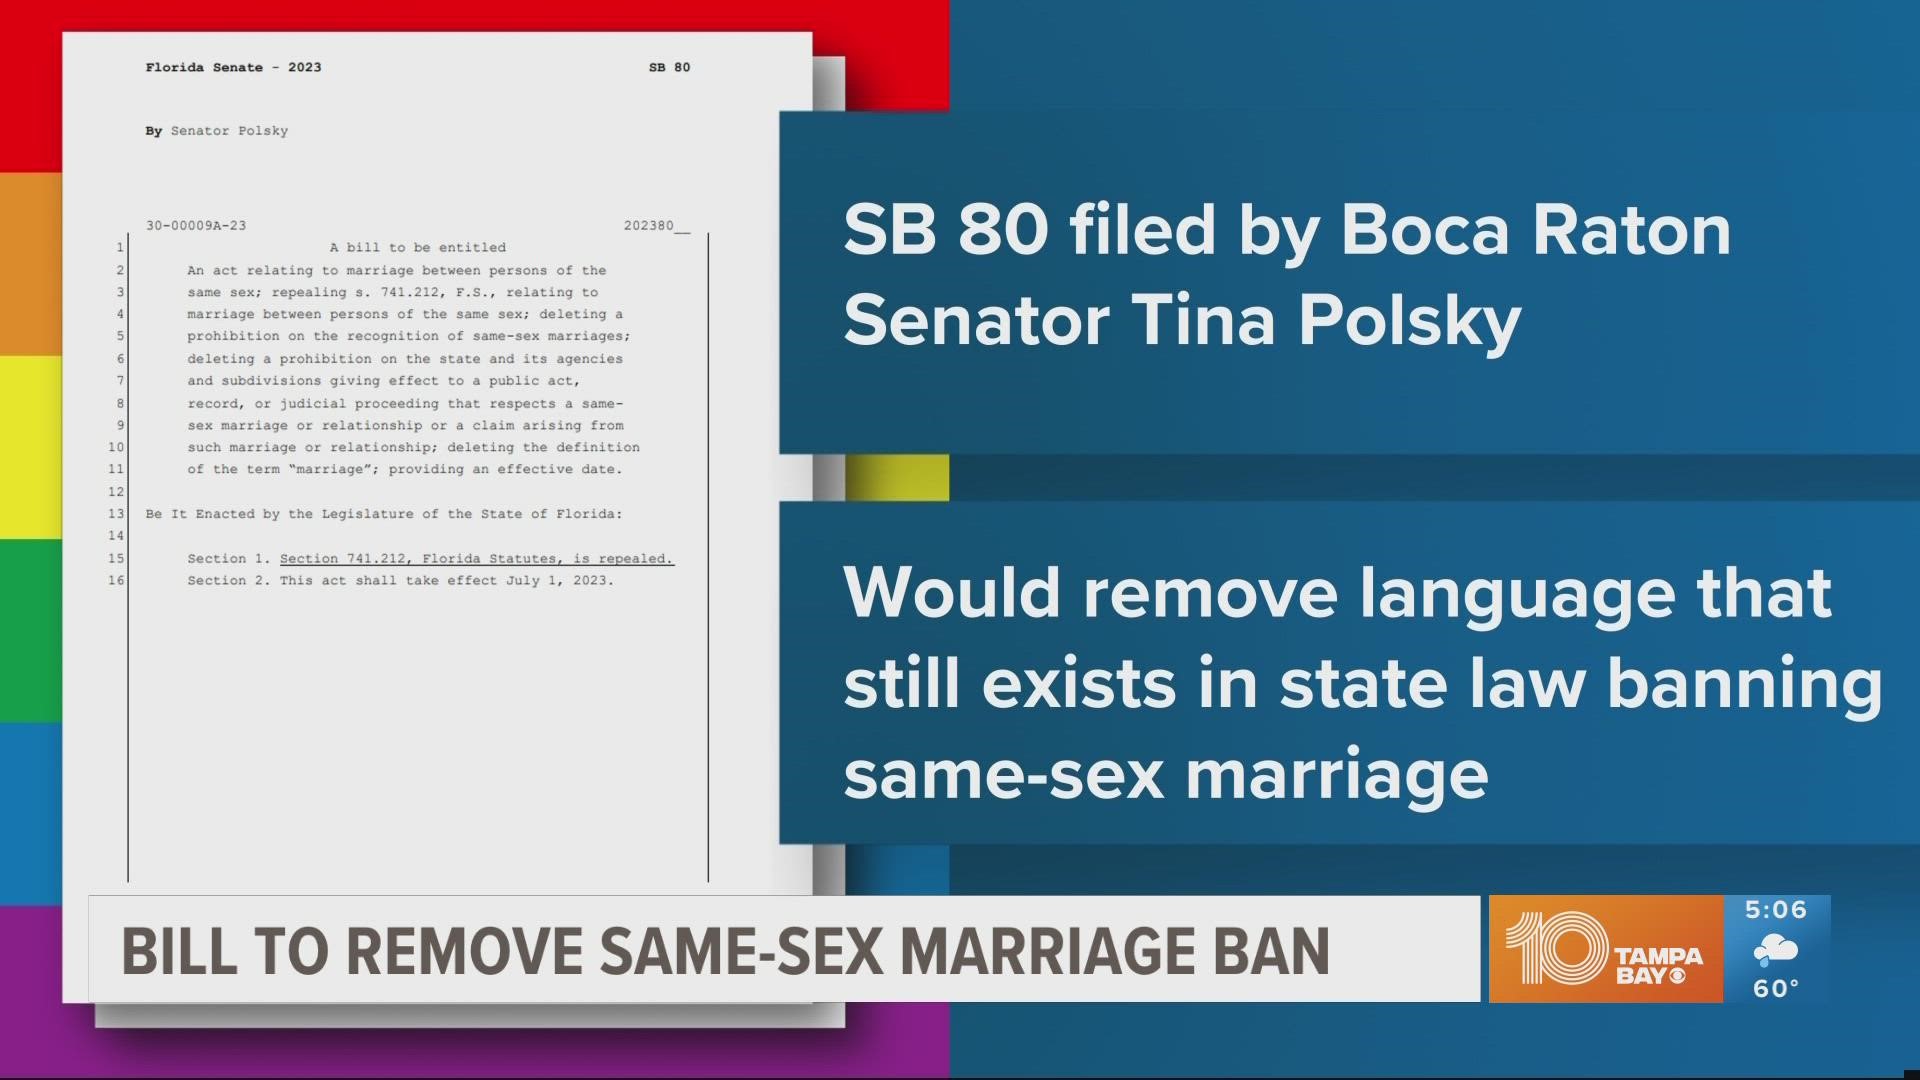 While same-sex marriage is legal in Florida due to federal law, state law contains language that would ban it. The proposed bill would take out that language.